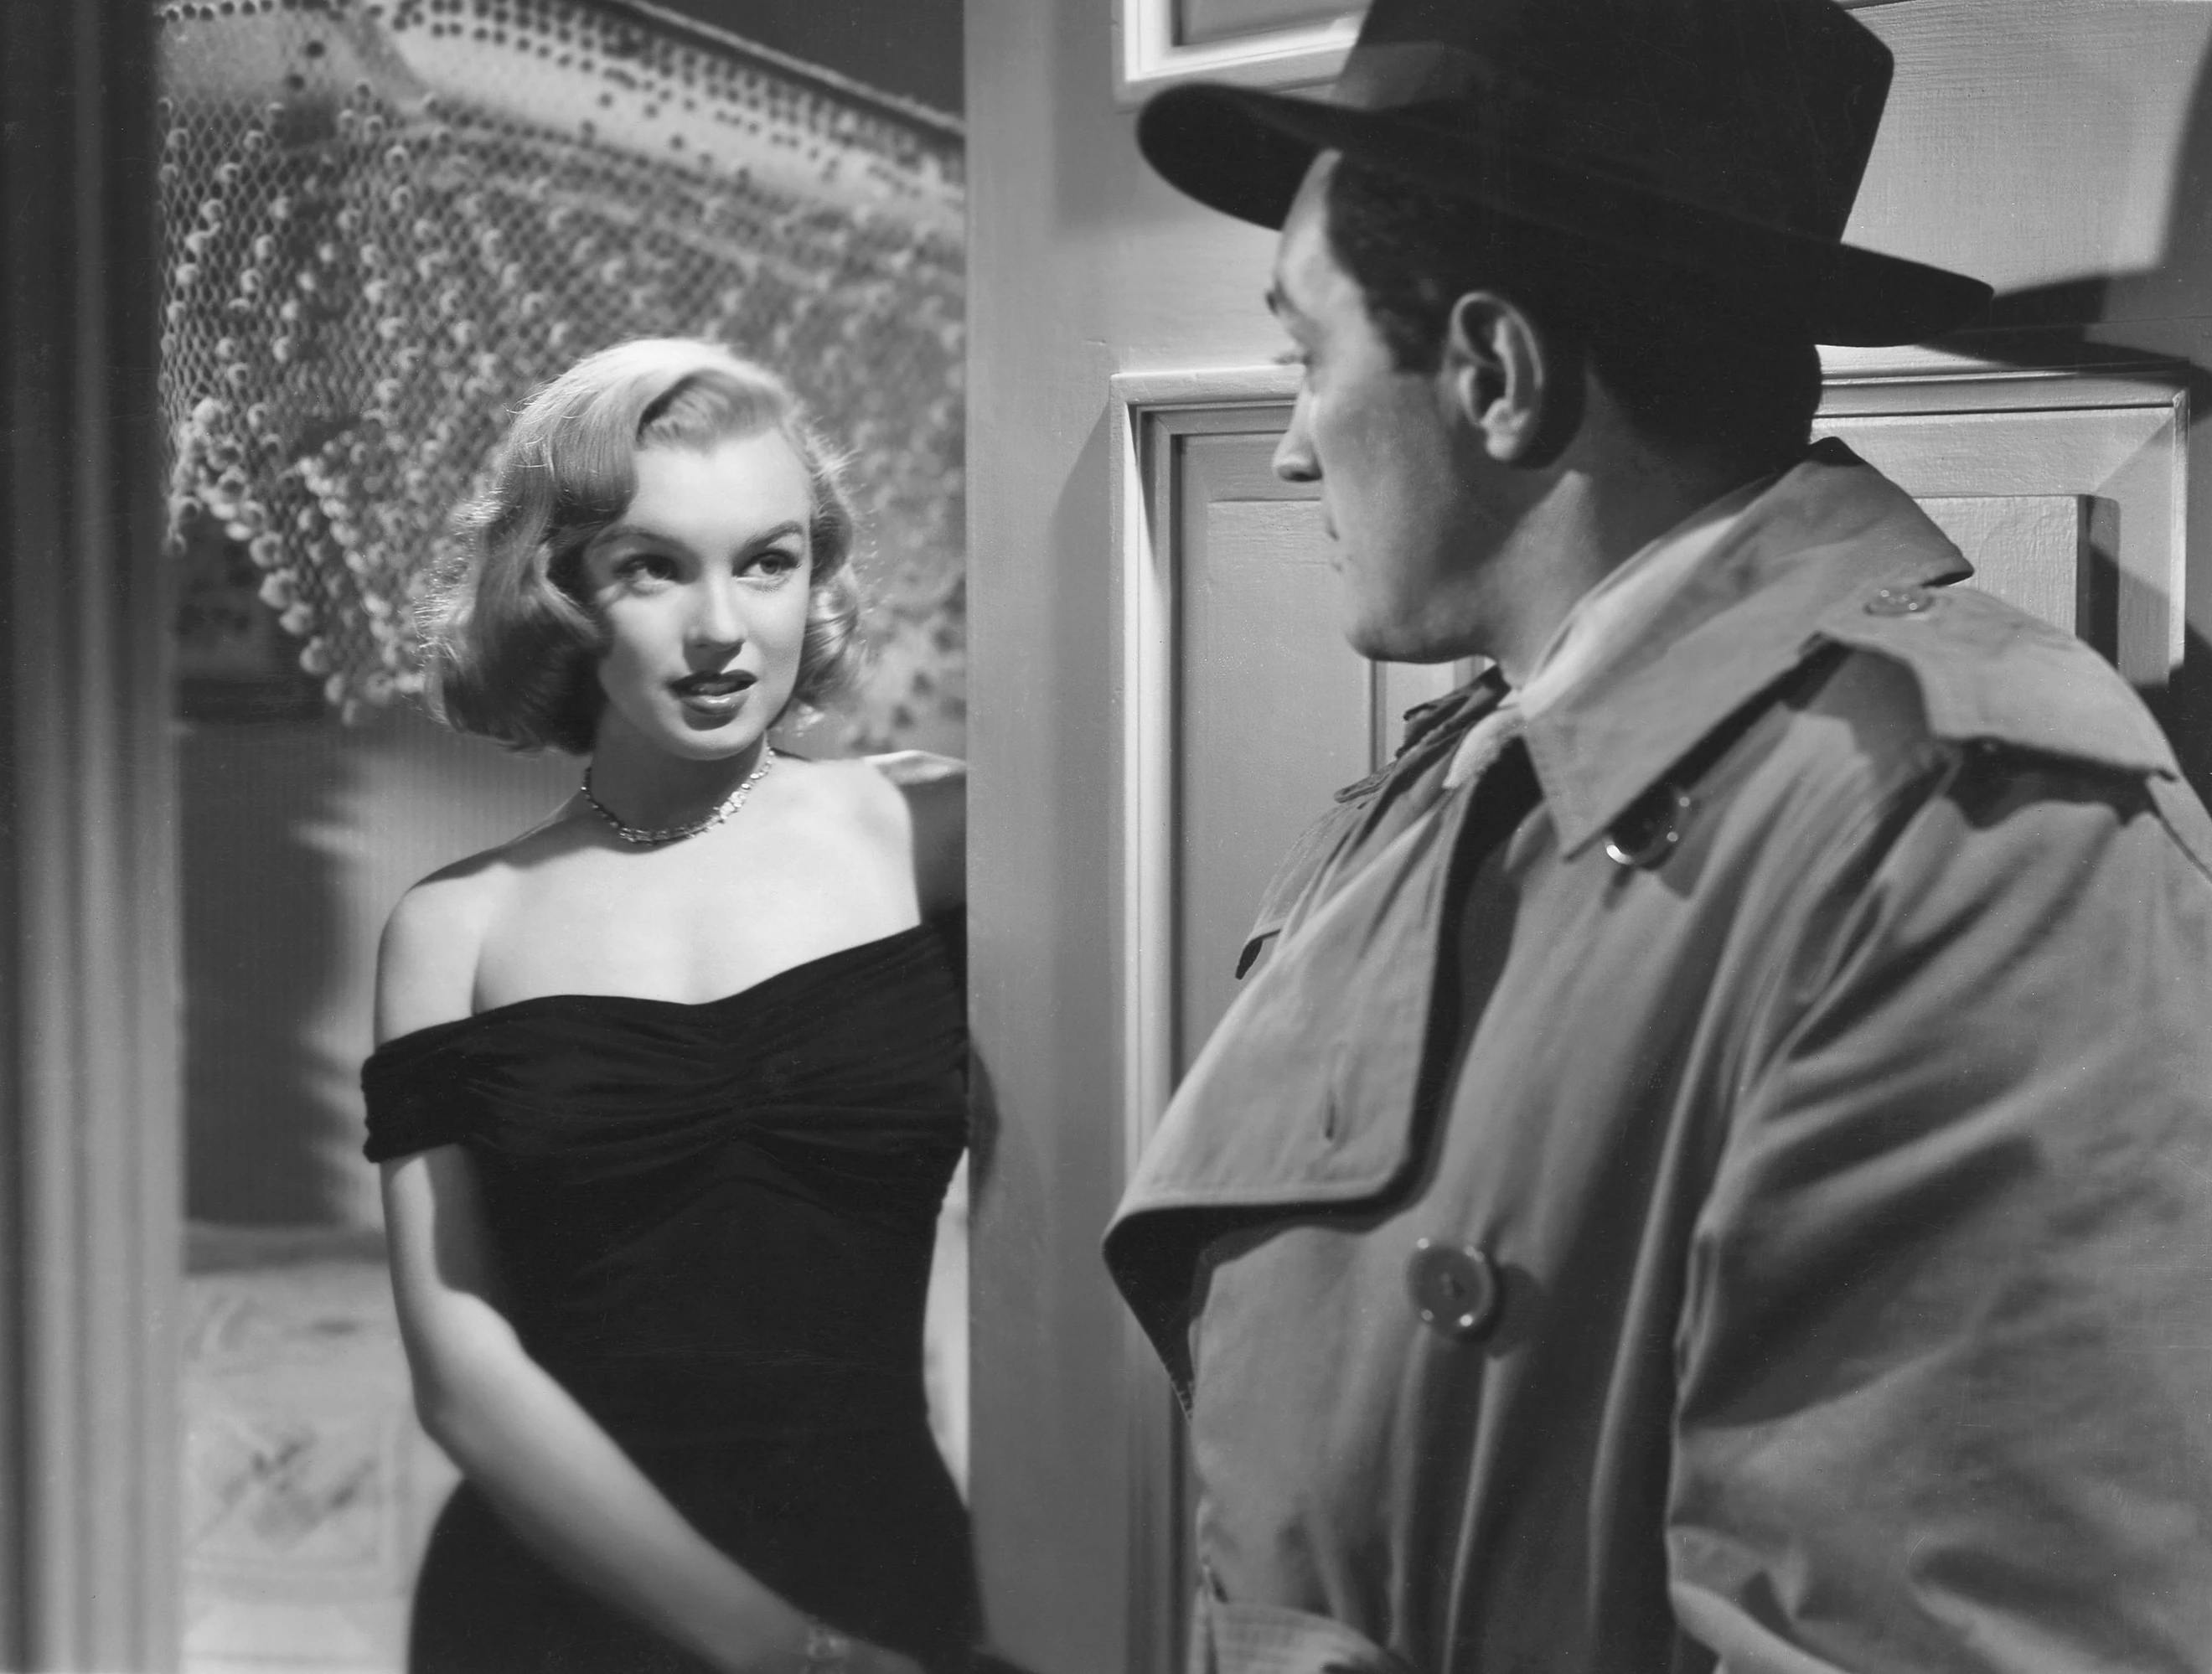 Photo of Marilyn Monroe in the Asphalt Jungle from the May 1961 issue of TV-Radio Mirror. Macfadden Publications New York. Public domain, via Wikimedia Commons.